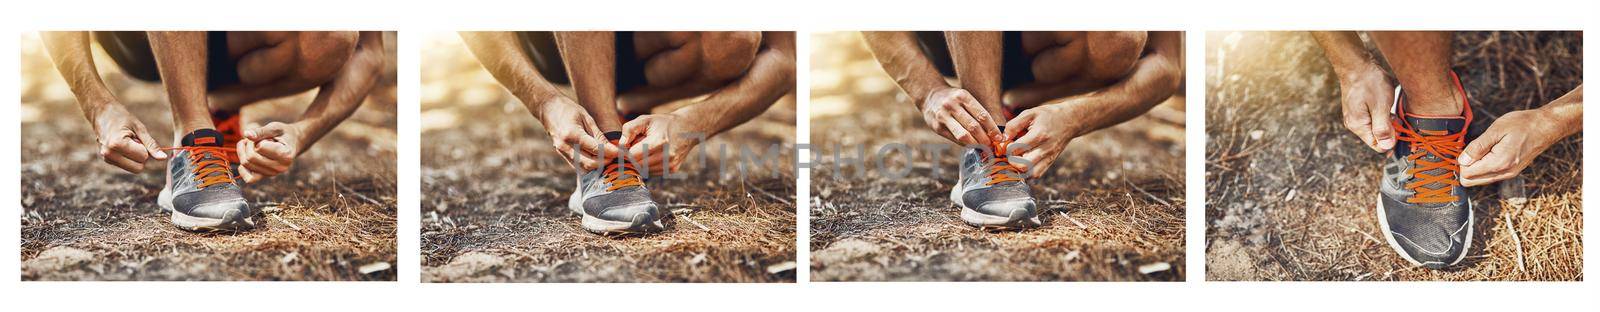 How to tie your shoelaces. Composite shot of a young person tying their shoelaces step by step outdoors before a workout. by YuriArcurs